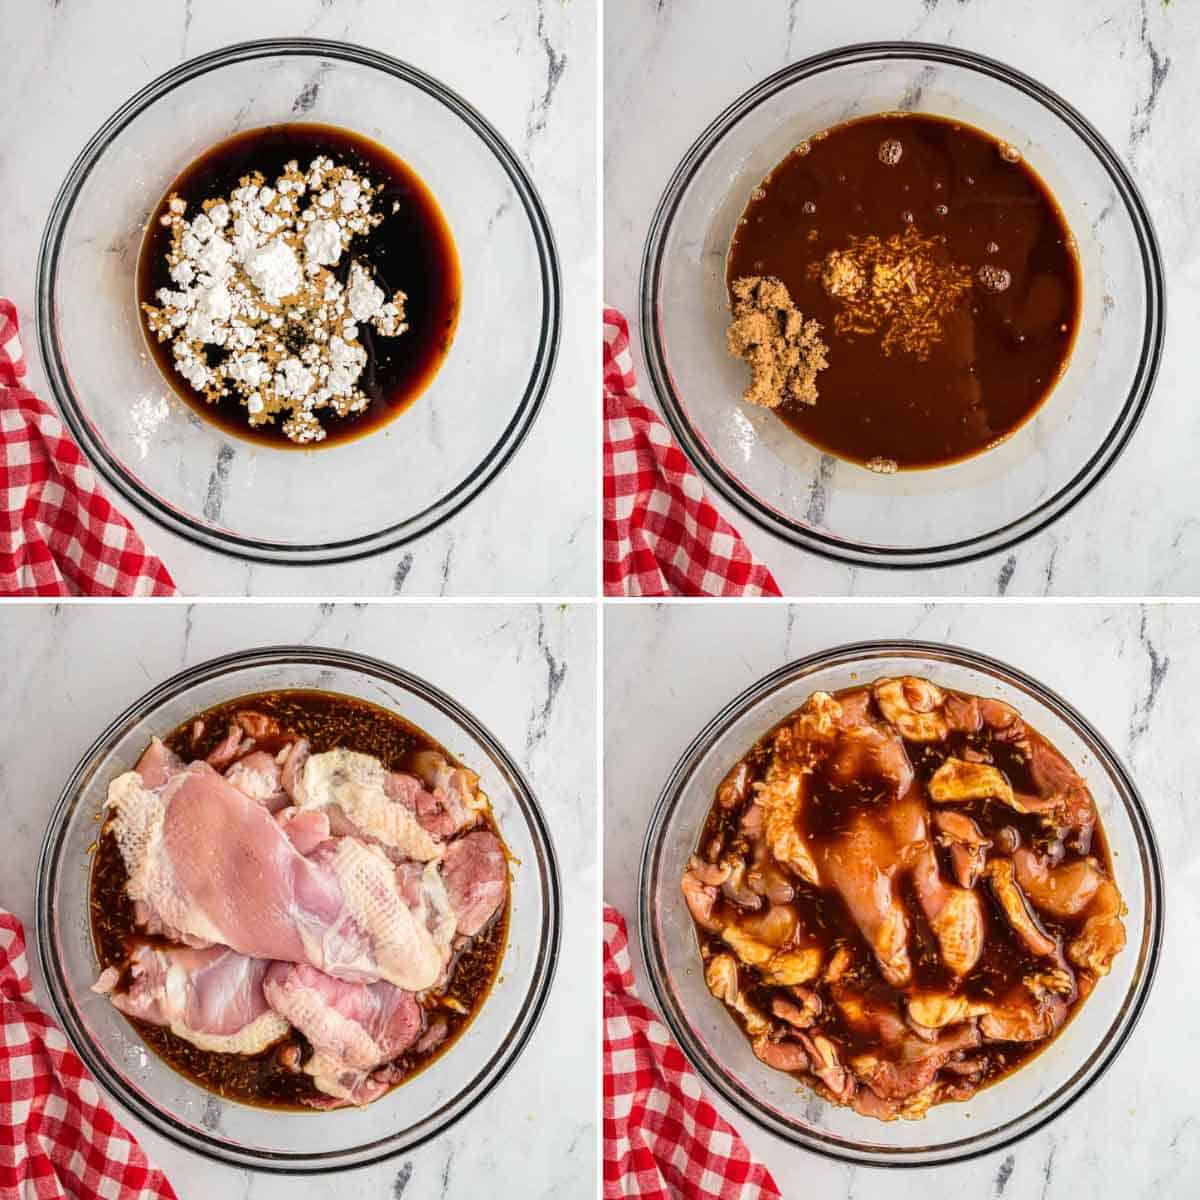 Four images showing the process of making teriyaki sauce and marinating raw chicken.